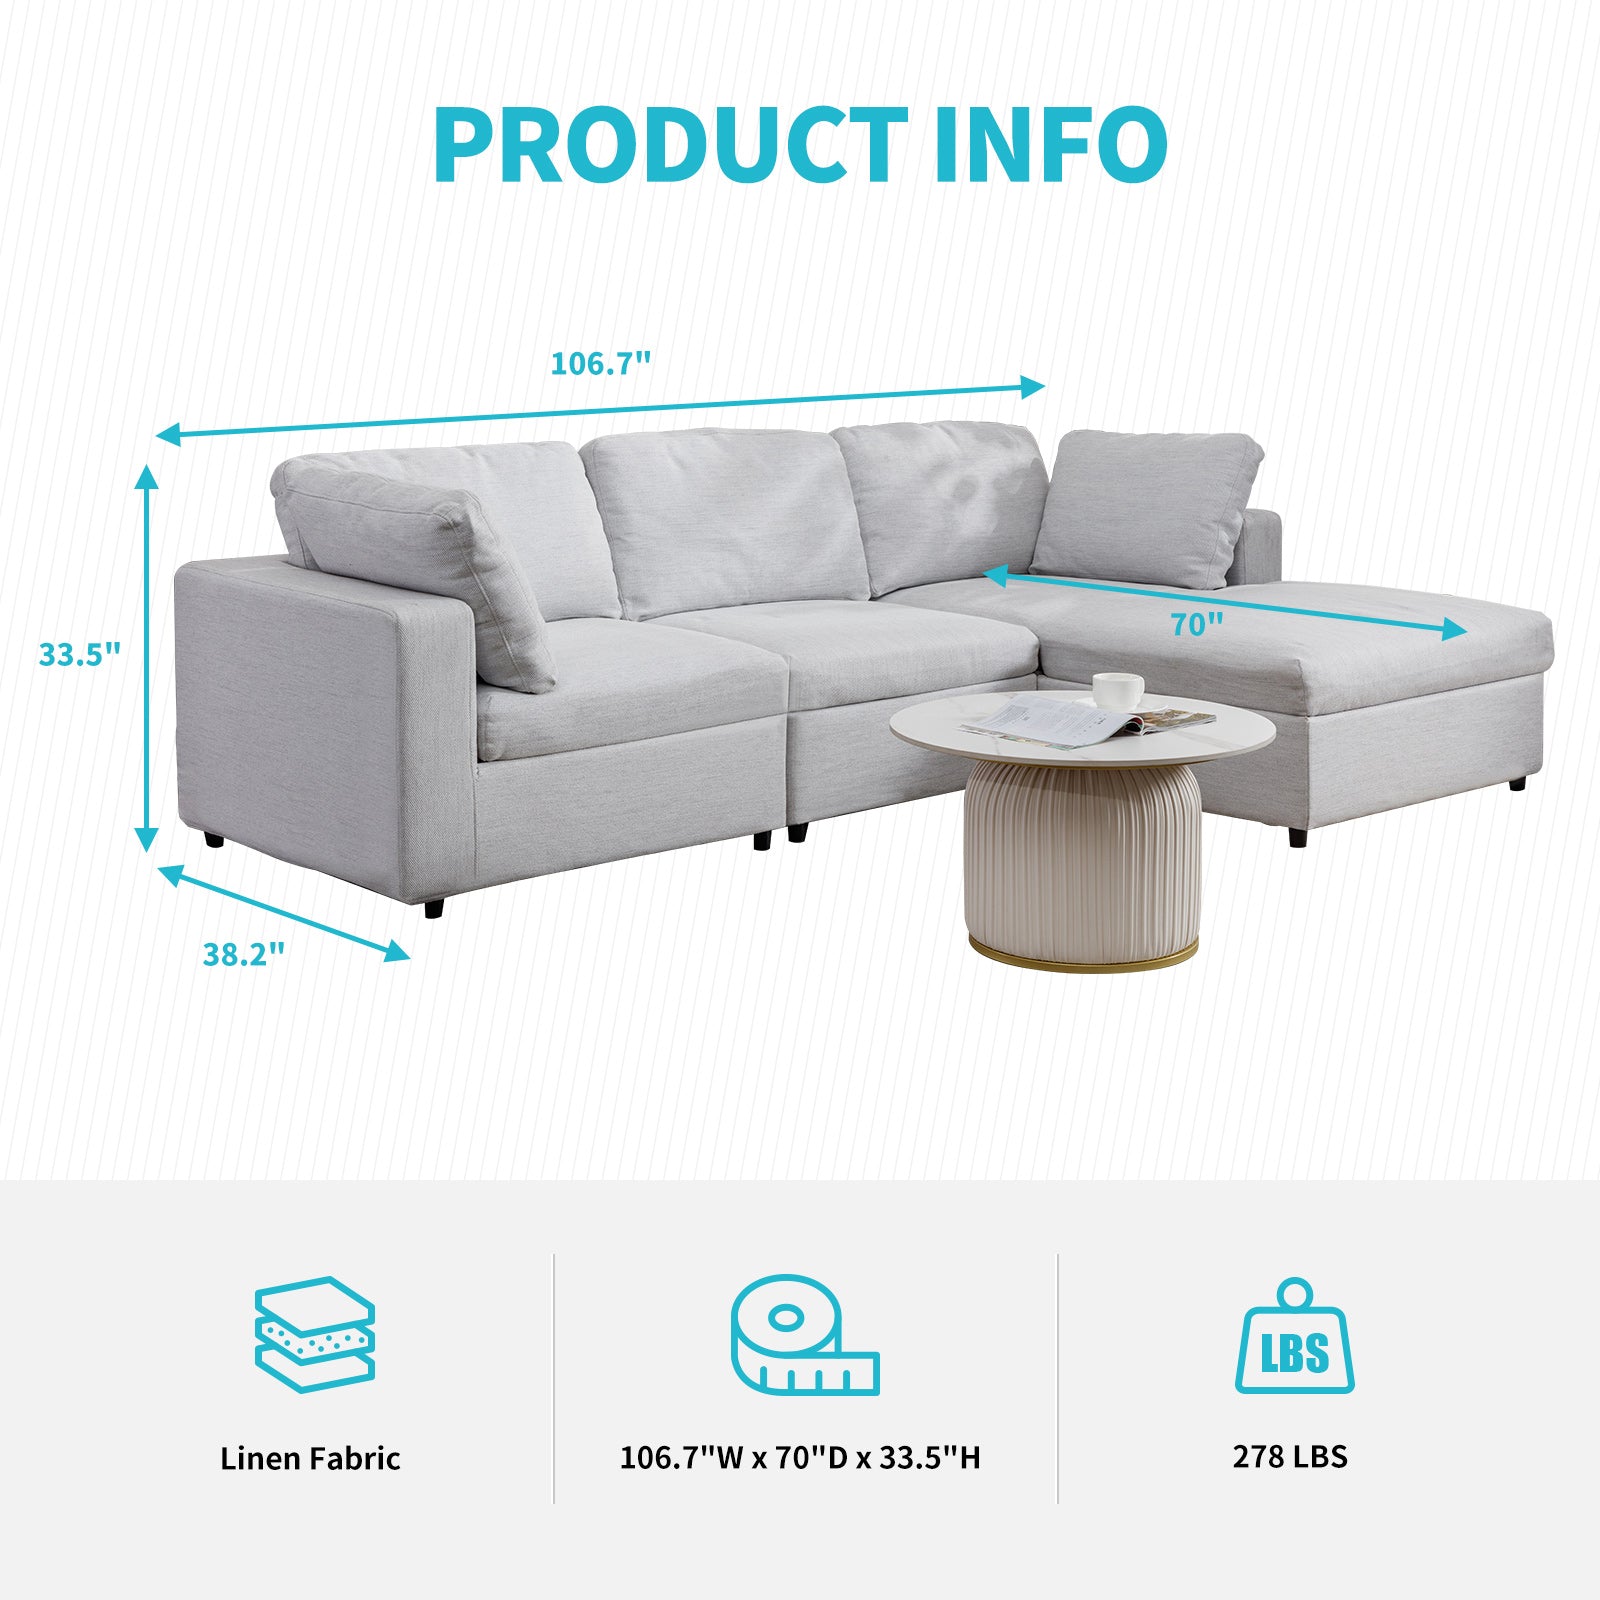 Cecer 107" Right Chaise L Shaped Sectional Sofa with 2 Free Cushions, Extra Large Sofa Couch with Linen Fabric & 6" High Resilience Foam for Living Room